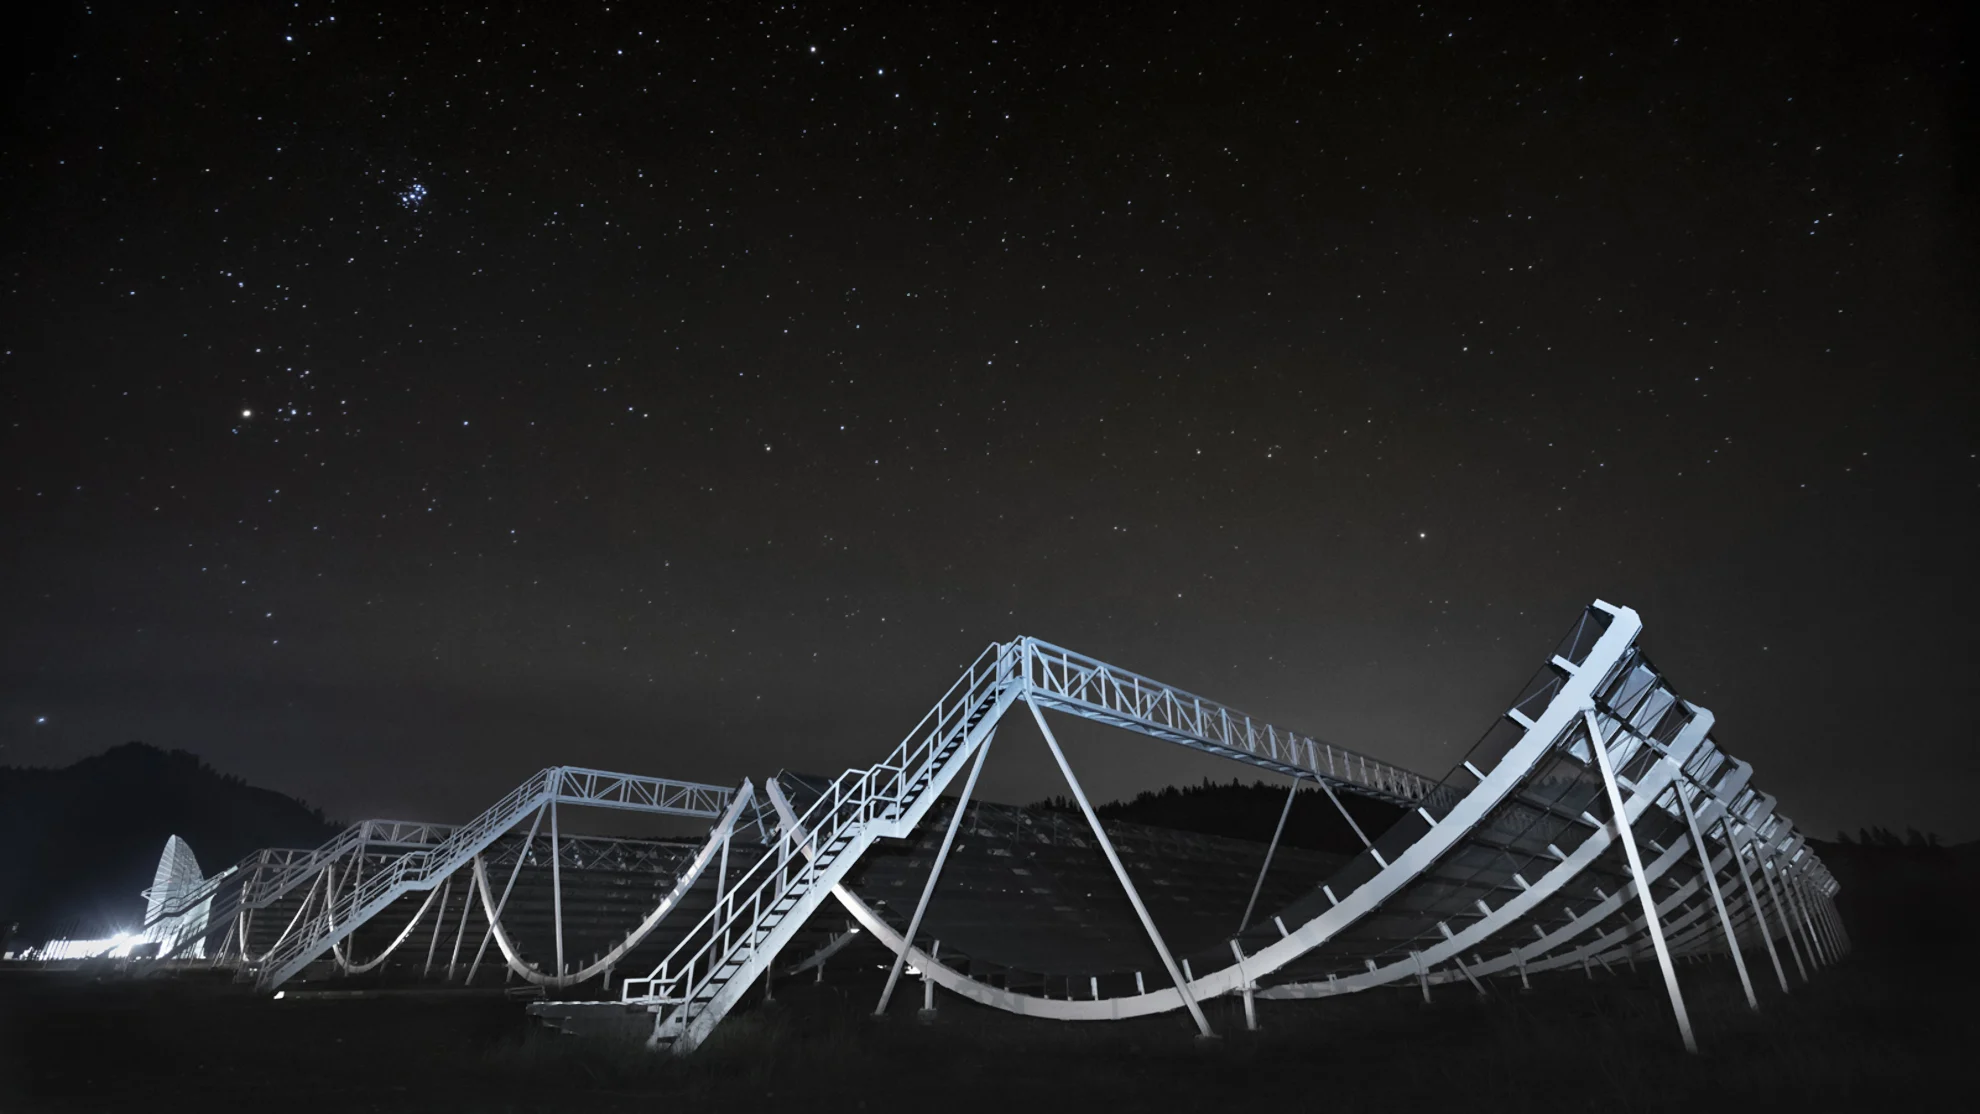 Astronomers discover likely source of strange radio bursts from space